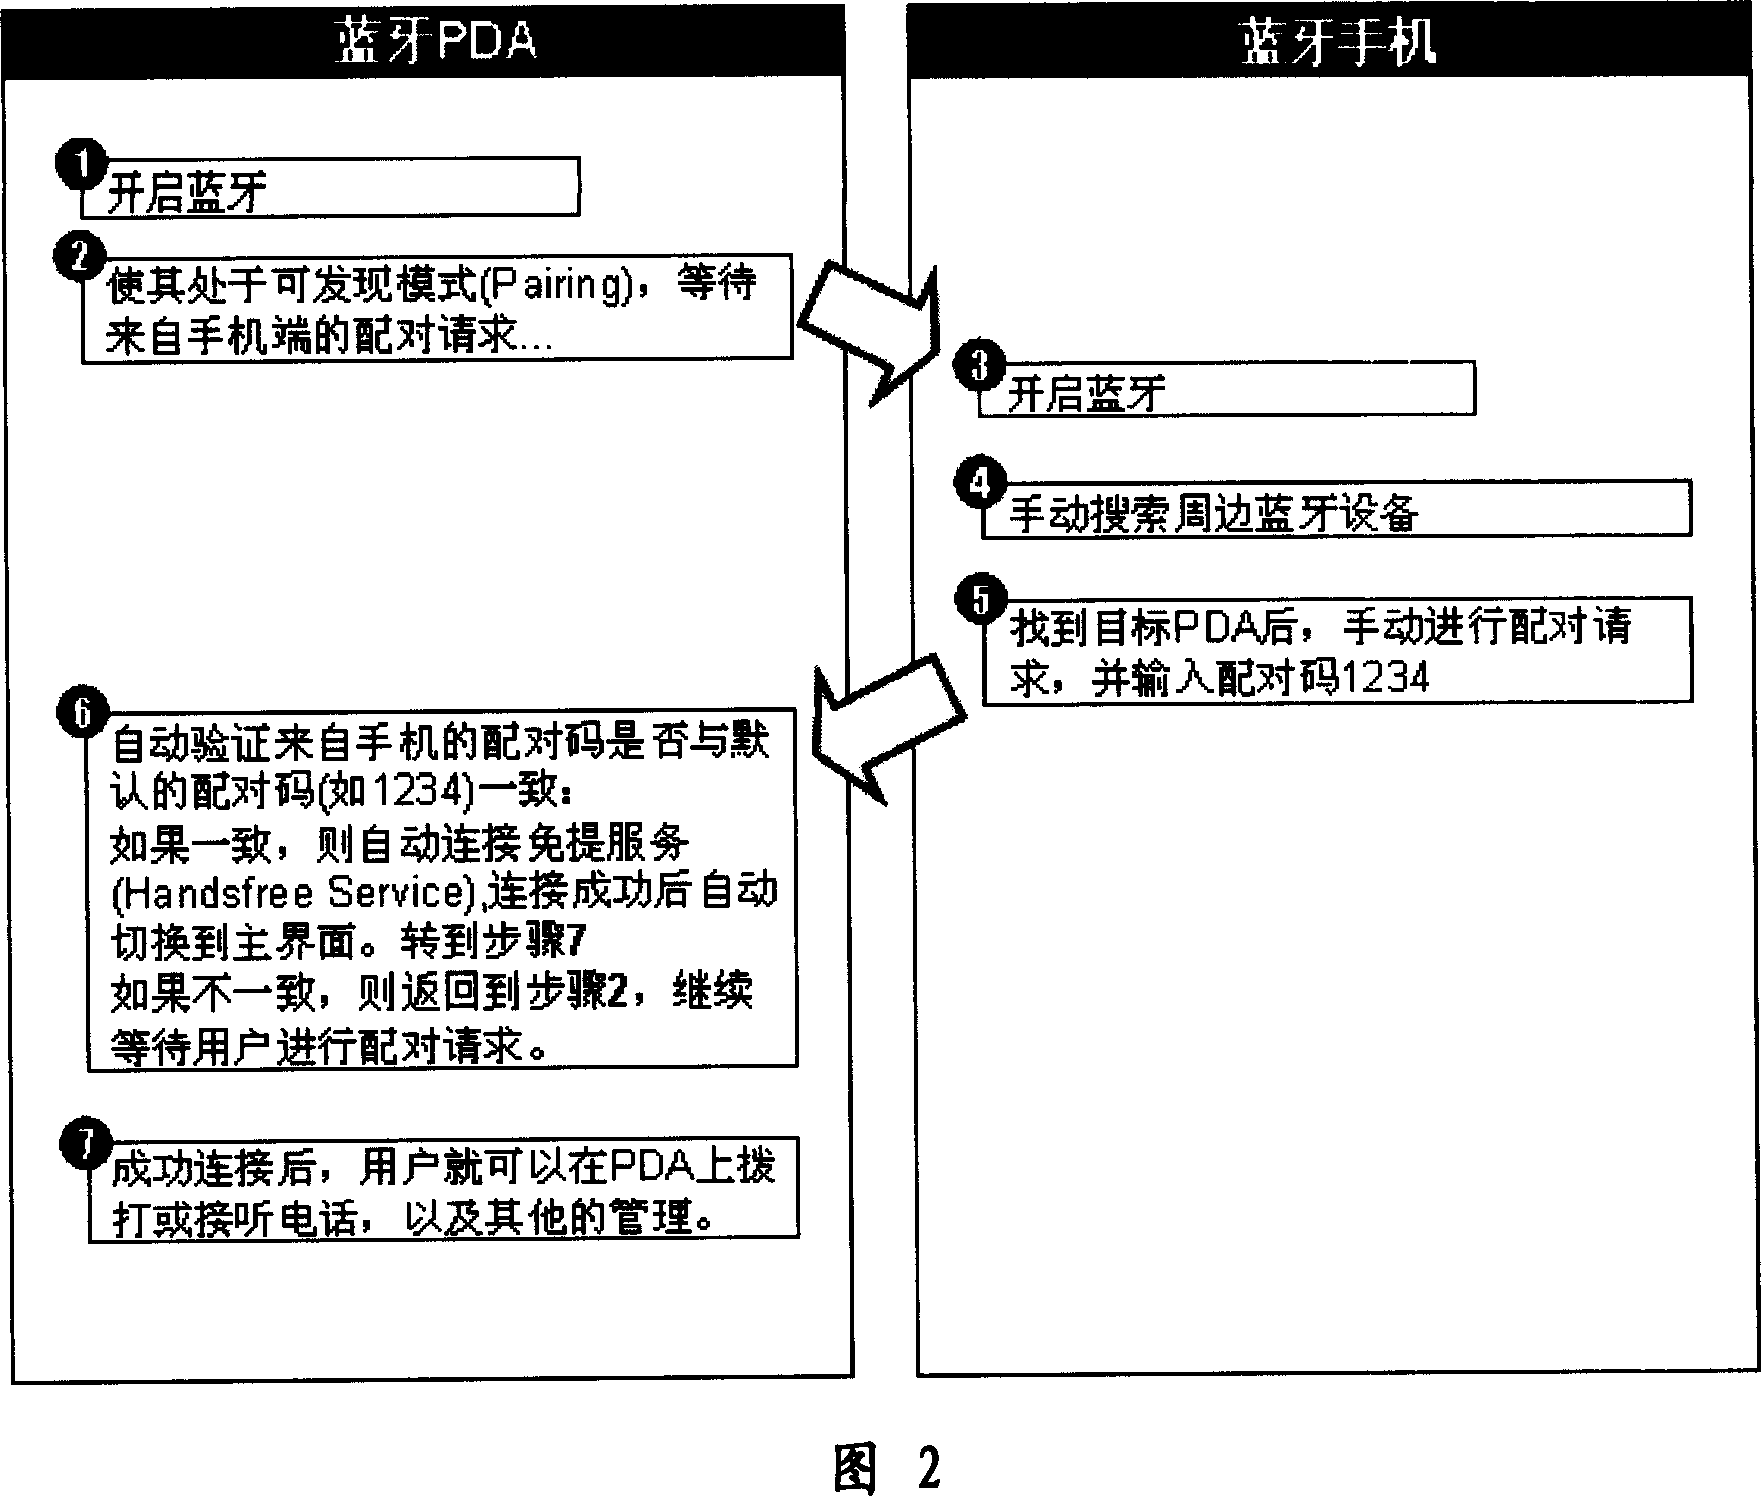 Method for implementing handfree speech of mobile phone based on blue tooth technology on PDA equipment